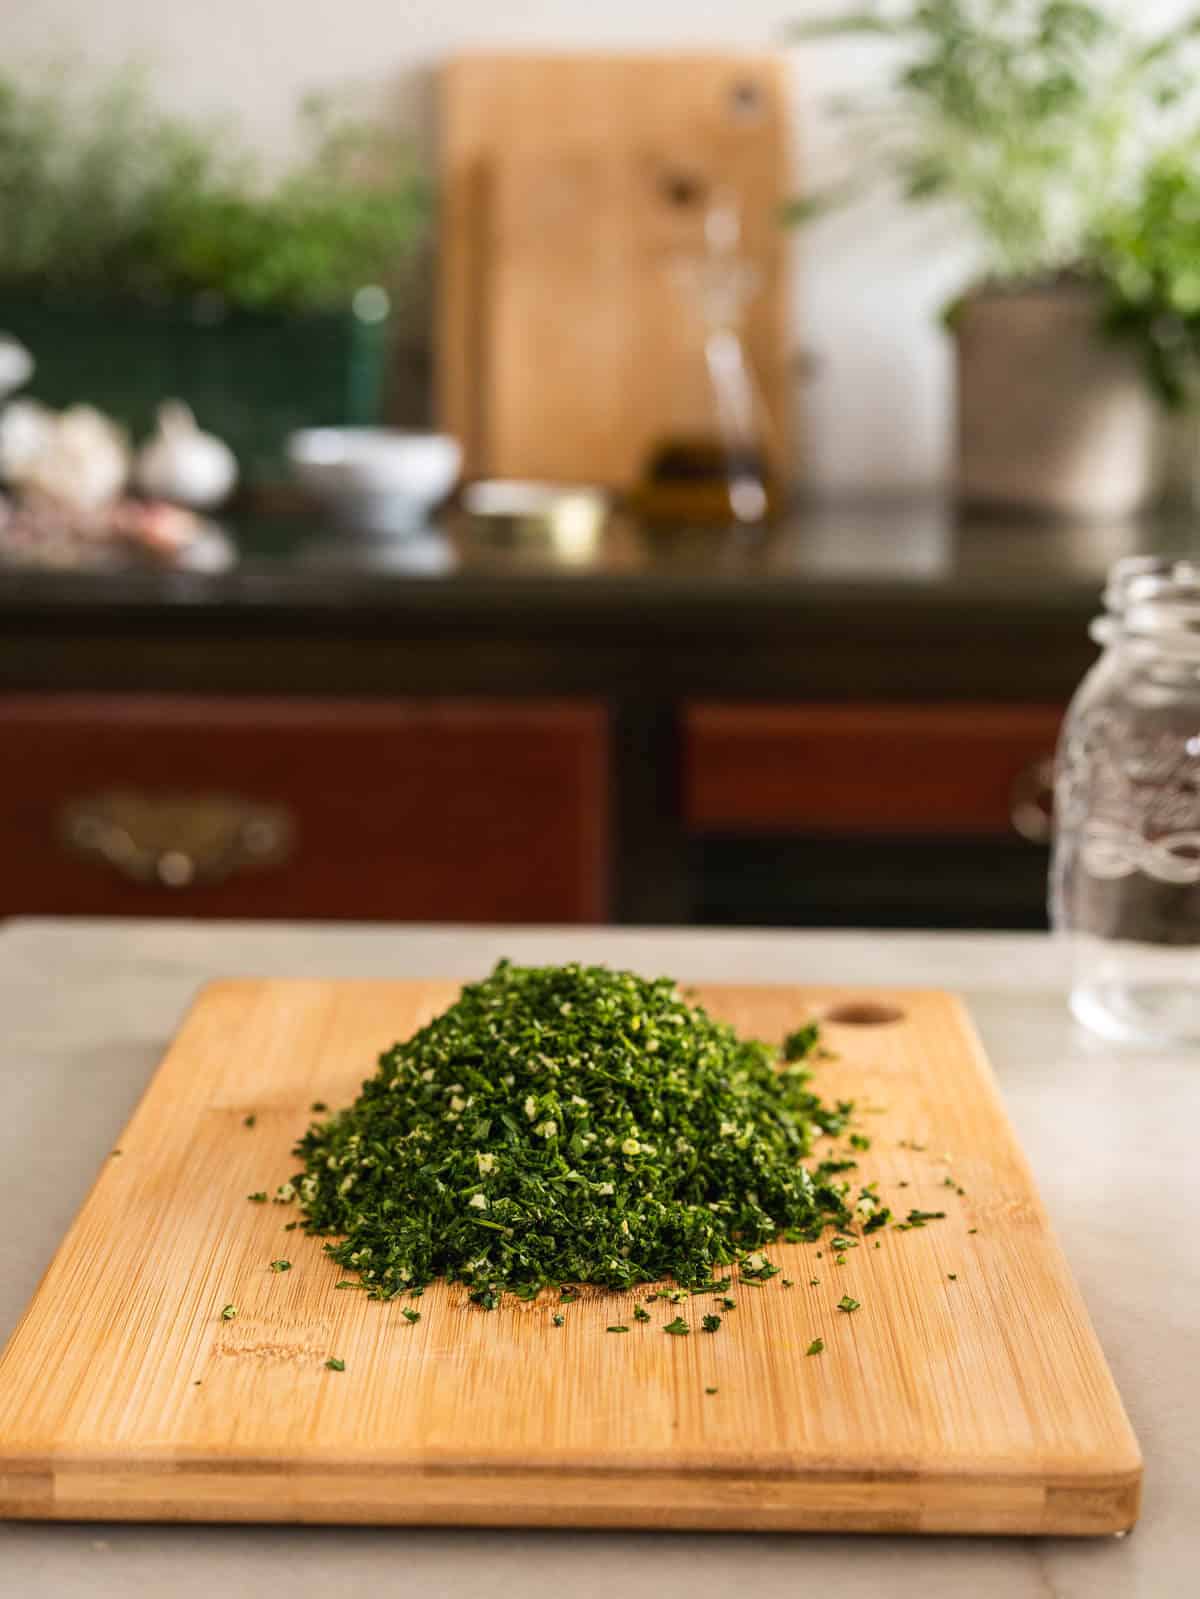 chop together parsley, carrot greens, and garlic until completely mixed.